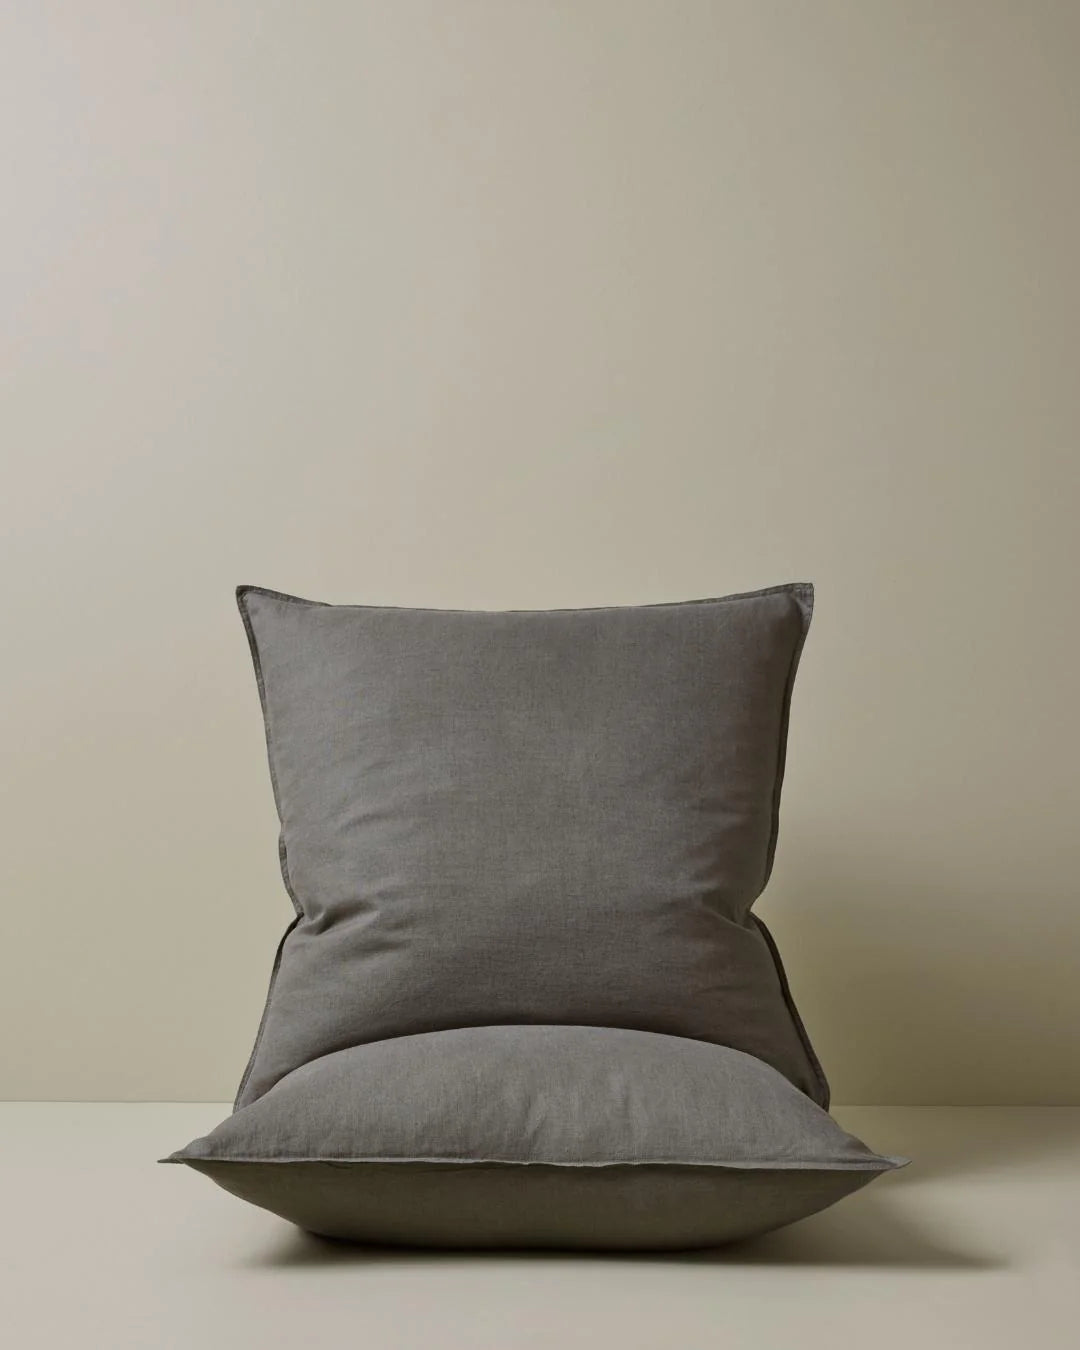 Crafted from the highest quality French Flax Linen, each product from the Ravello range is prewashed and aero finished for a unique and luxuriously soft, relaxed feel, making it a dream to rest and relax on.  The Charcoal colourway is perfect for those wanting a mid-toned, sophisticated grey to add depth, or match a dark or cool-toned bedroom.